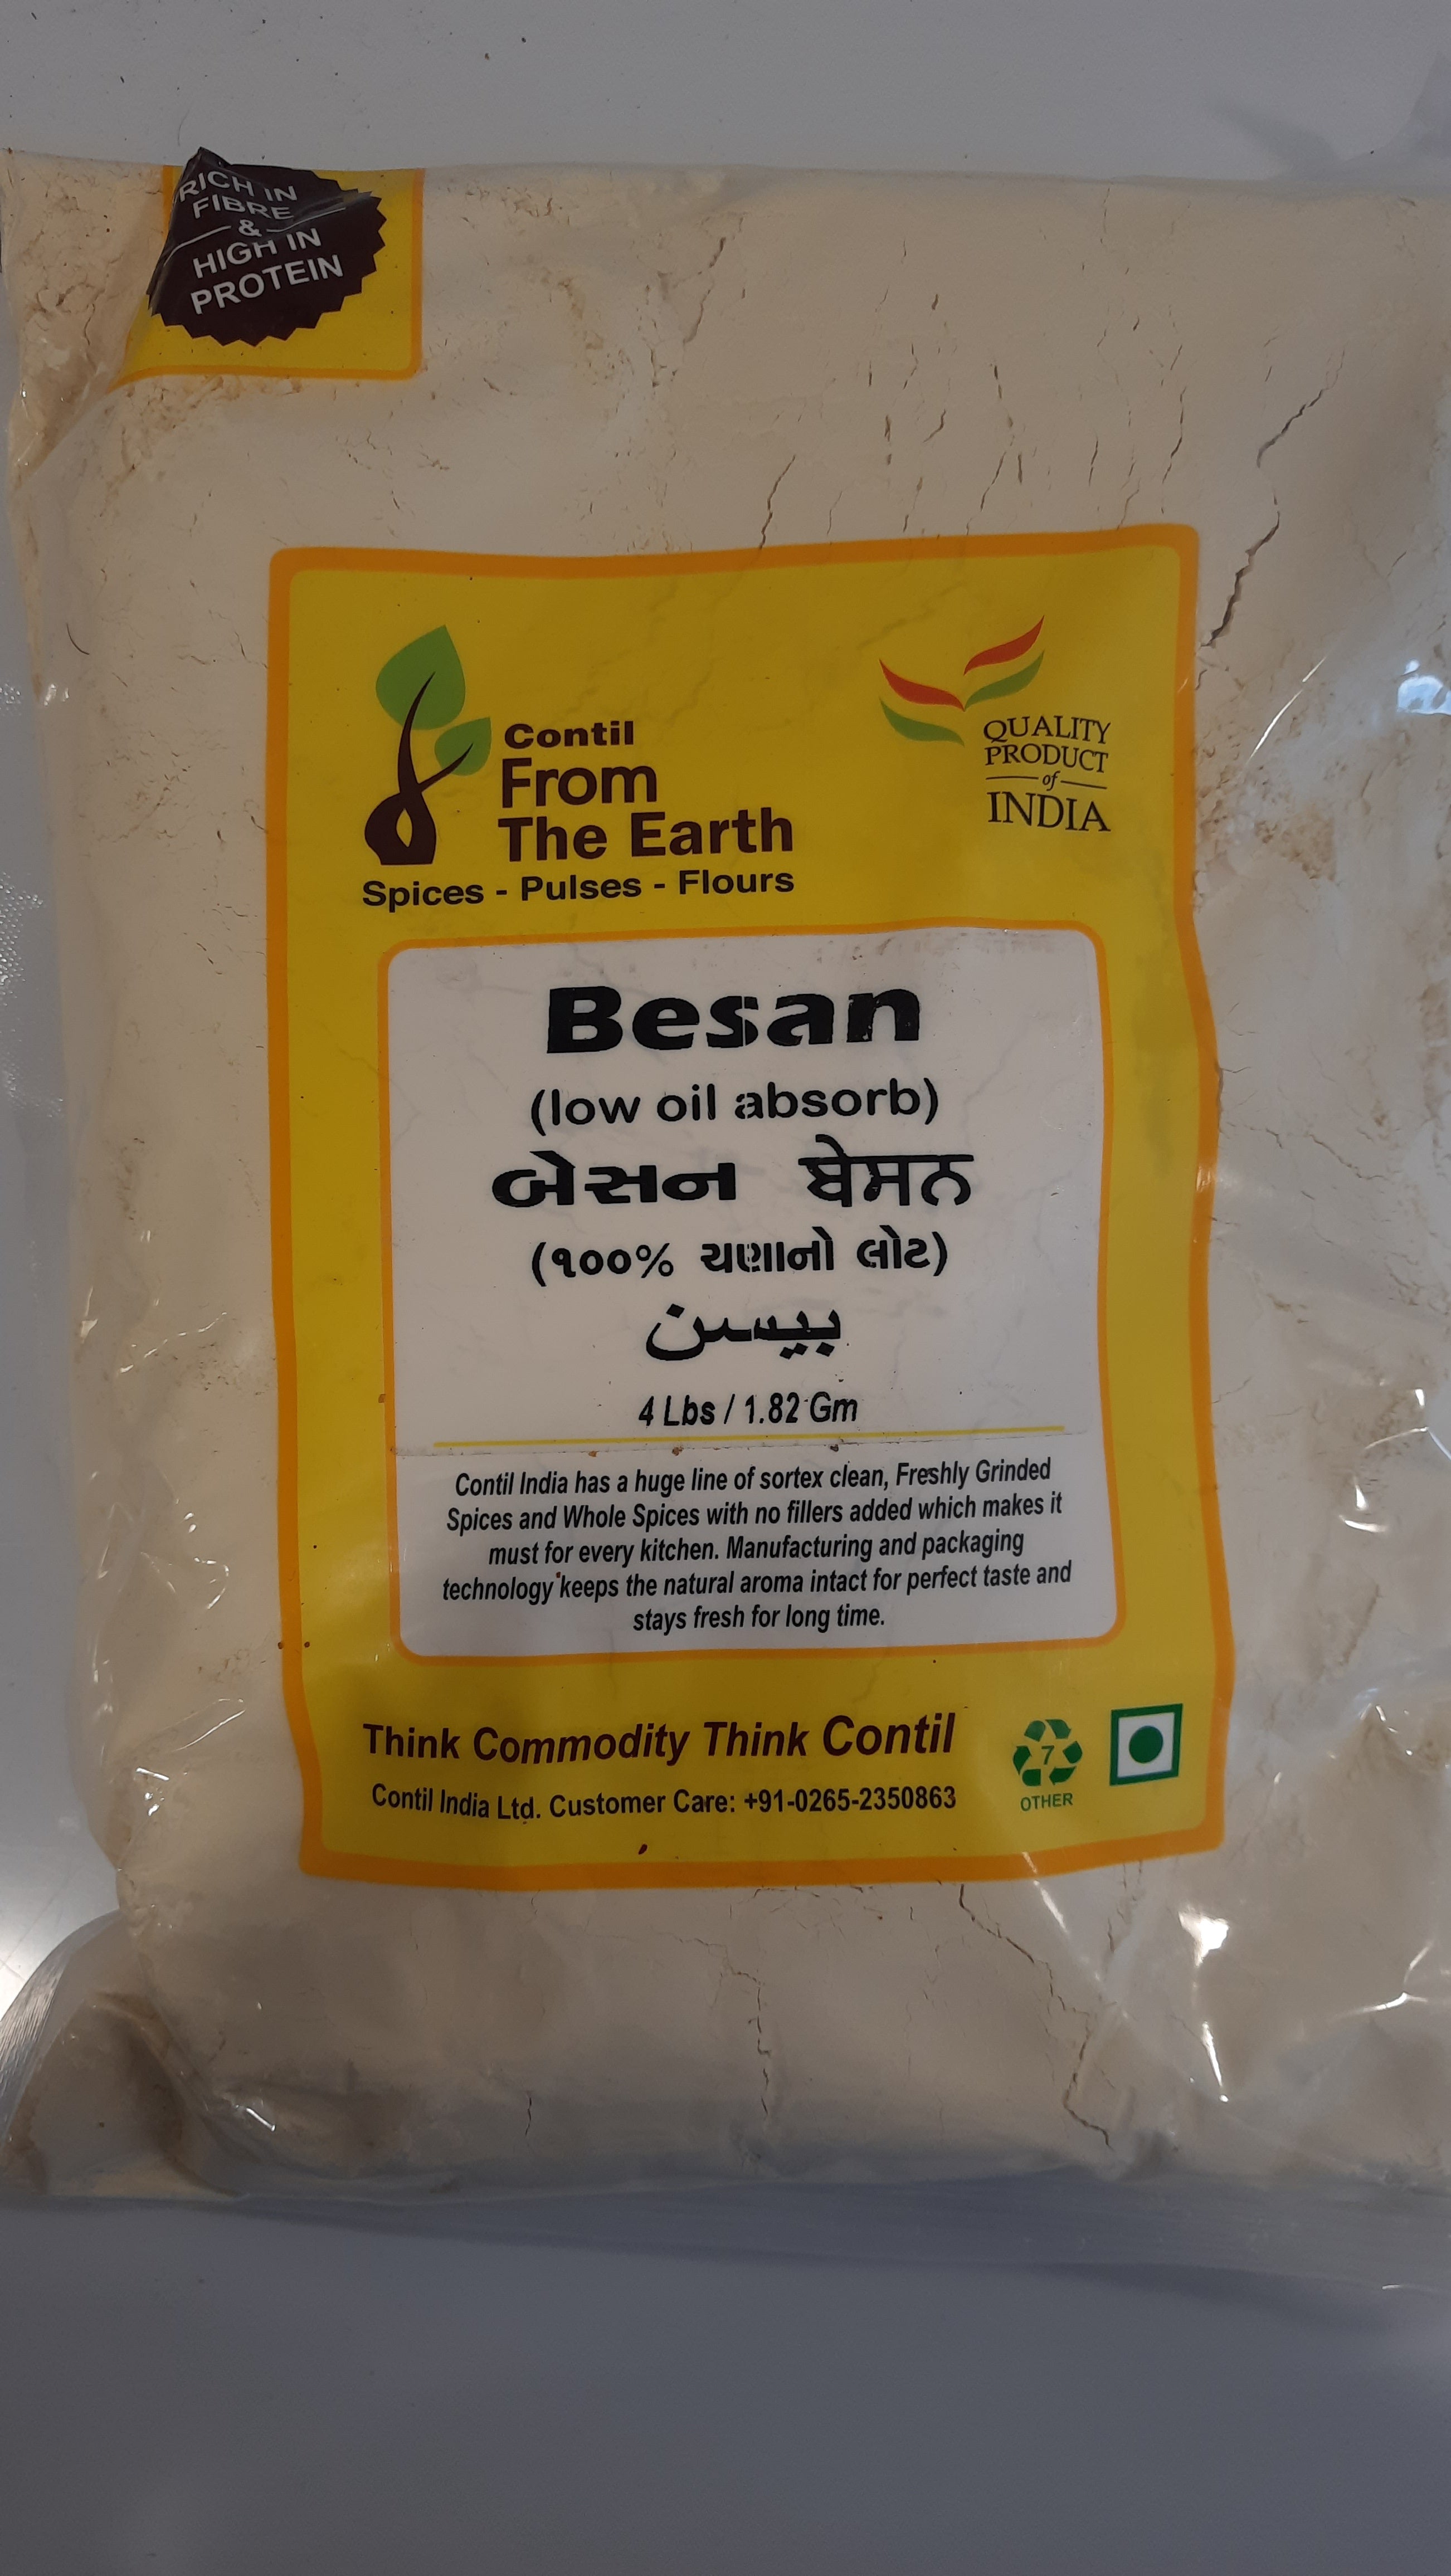 From the Earth - Besan 4lb